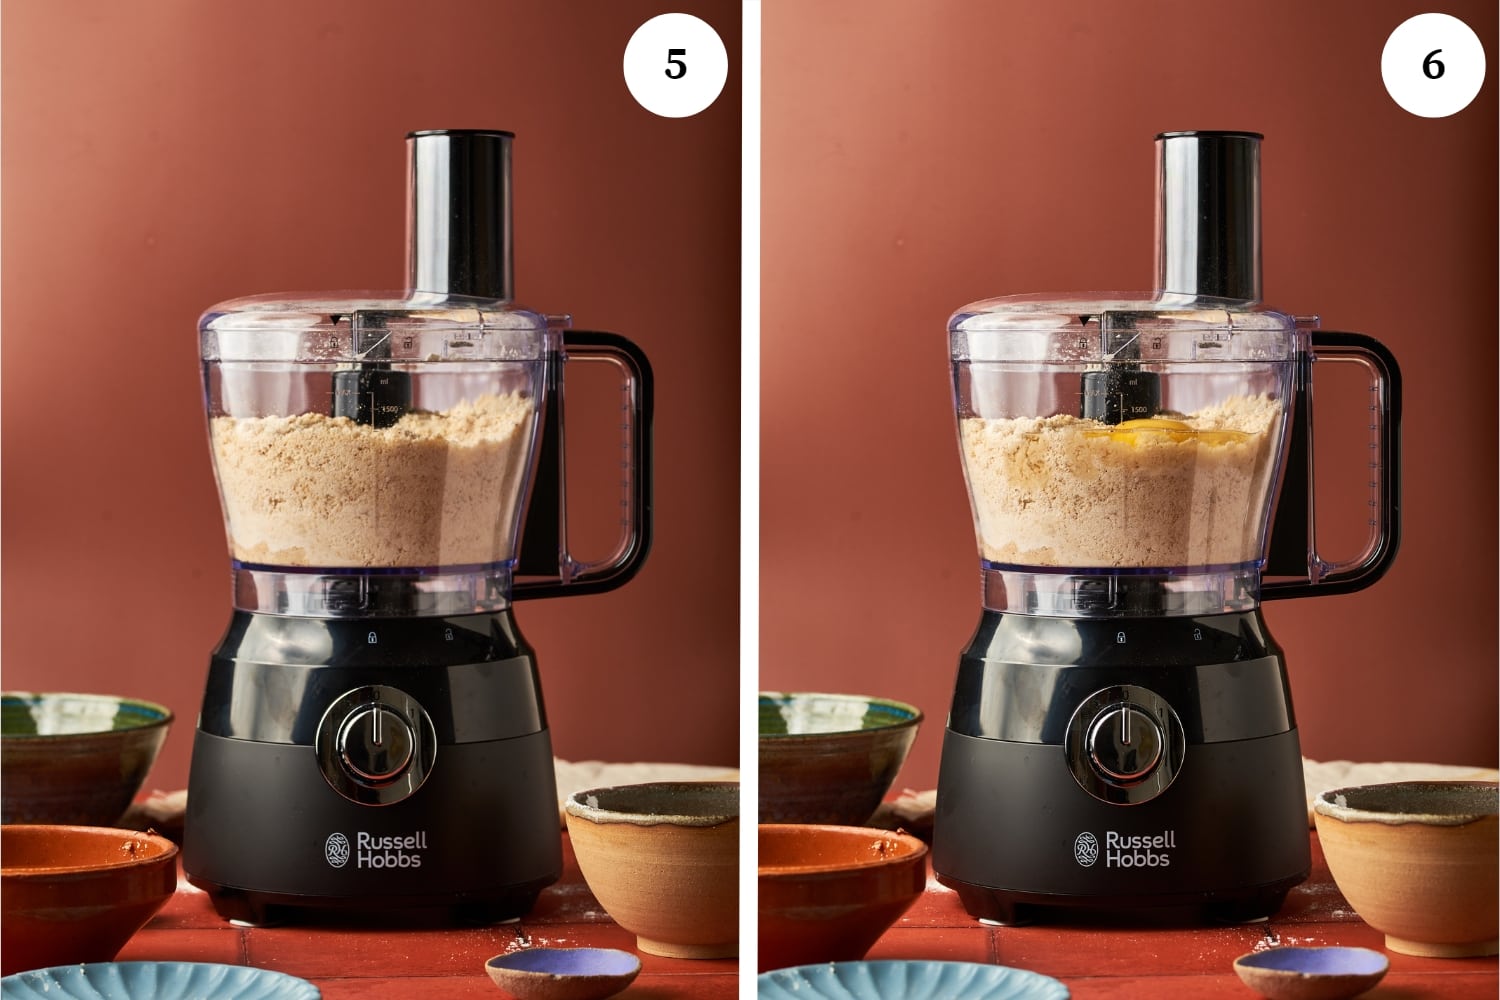 photo 1 is a food processor with ground ingredients. photo 2 is a mix of ground ingredients with egg added in a food processor